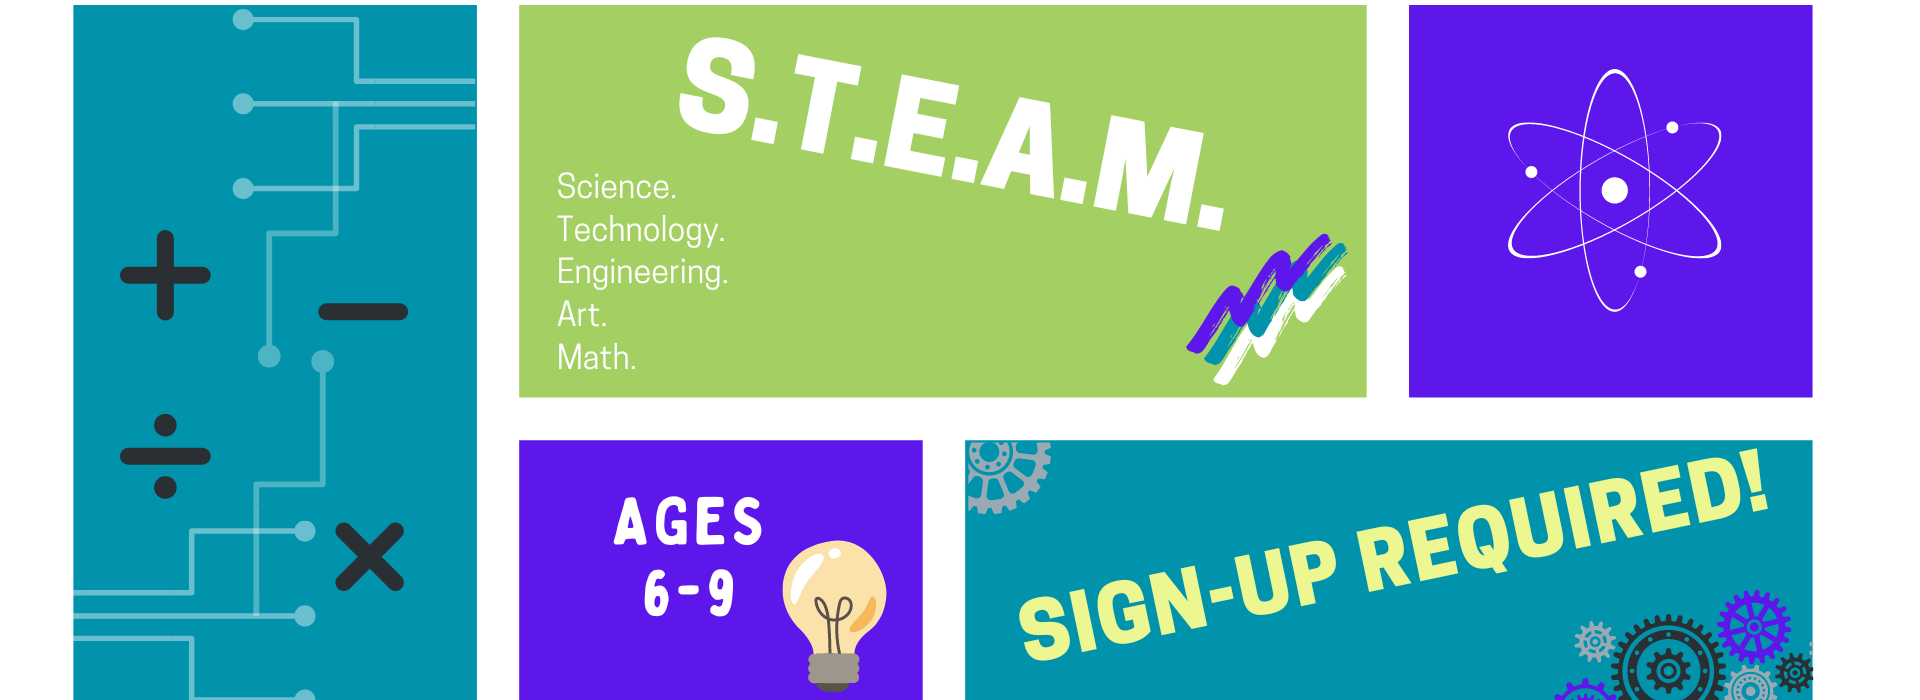 STEAM on Monday, April 8th for ages 6-9